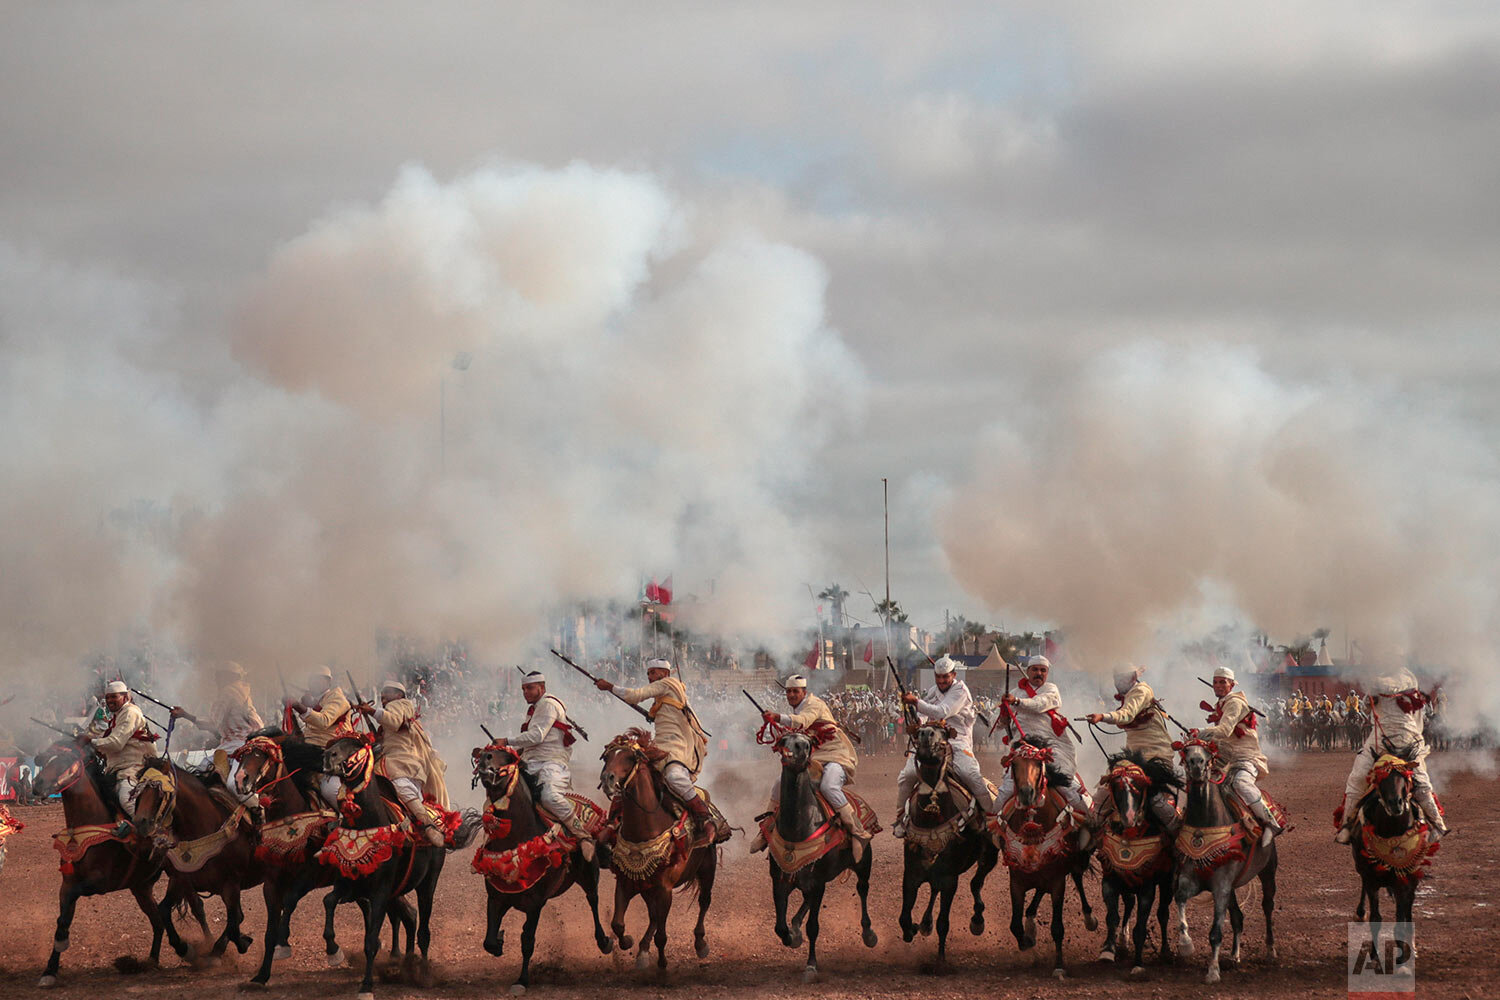  A troupe charges and fires their rifles during Tabourida, a traditional horse riding show also known as Fantasia, in the coastal town of El Jadida, Morocco, on July 25, 2019. (AP Photo/Mosa'ab Elshamy) 